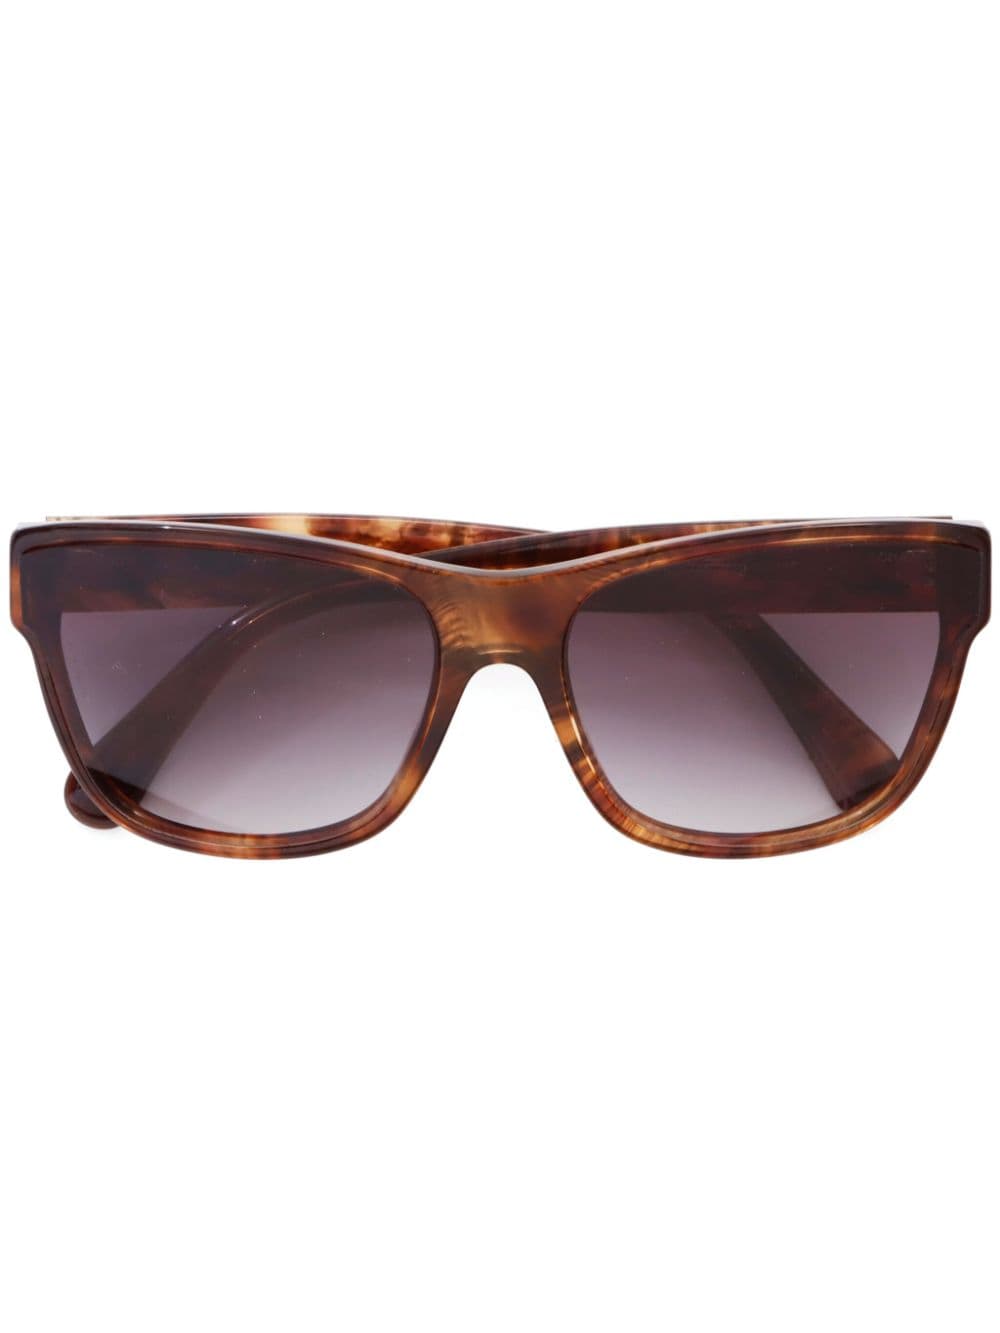 CHANEL Pre-Owned CC-plaque rectangle-framed tortoiseshell sunglasses - Brown